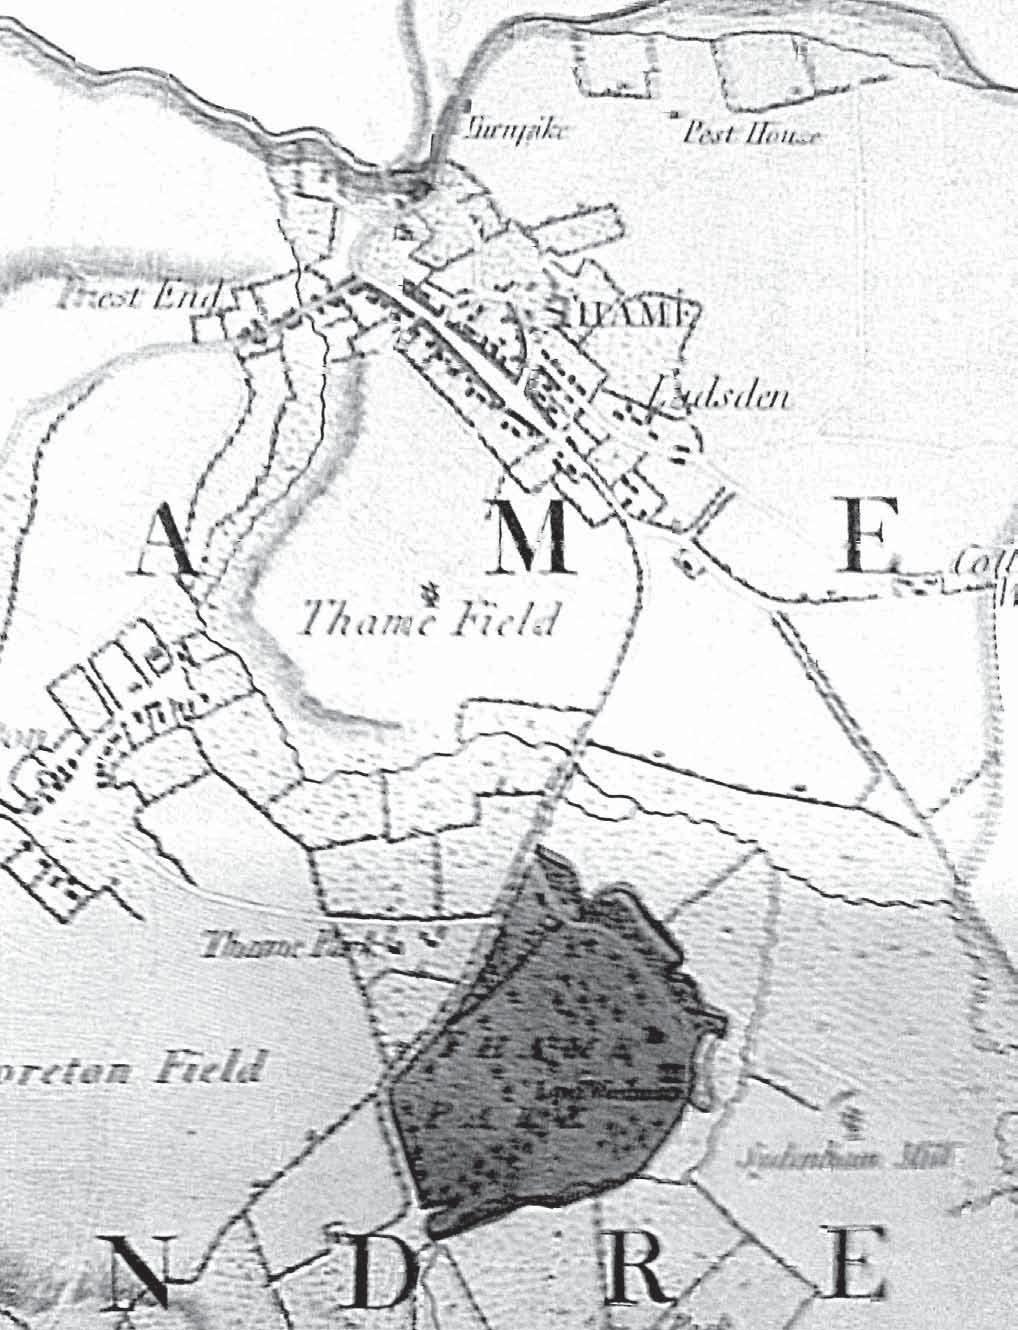 Approximate location of site N Land at The Elms, Thame, Oxfordshire, 2013